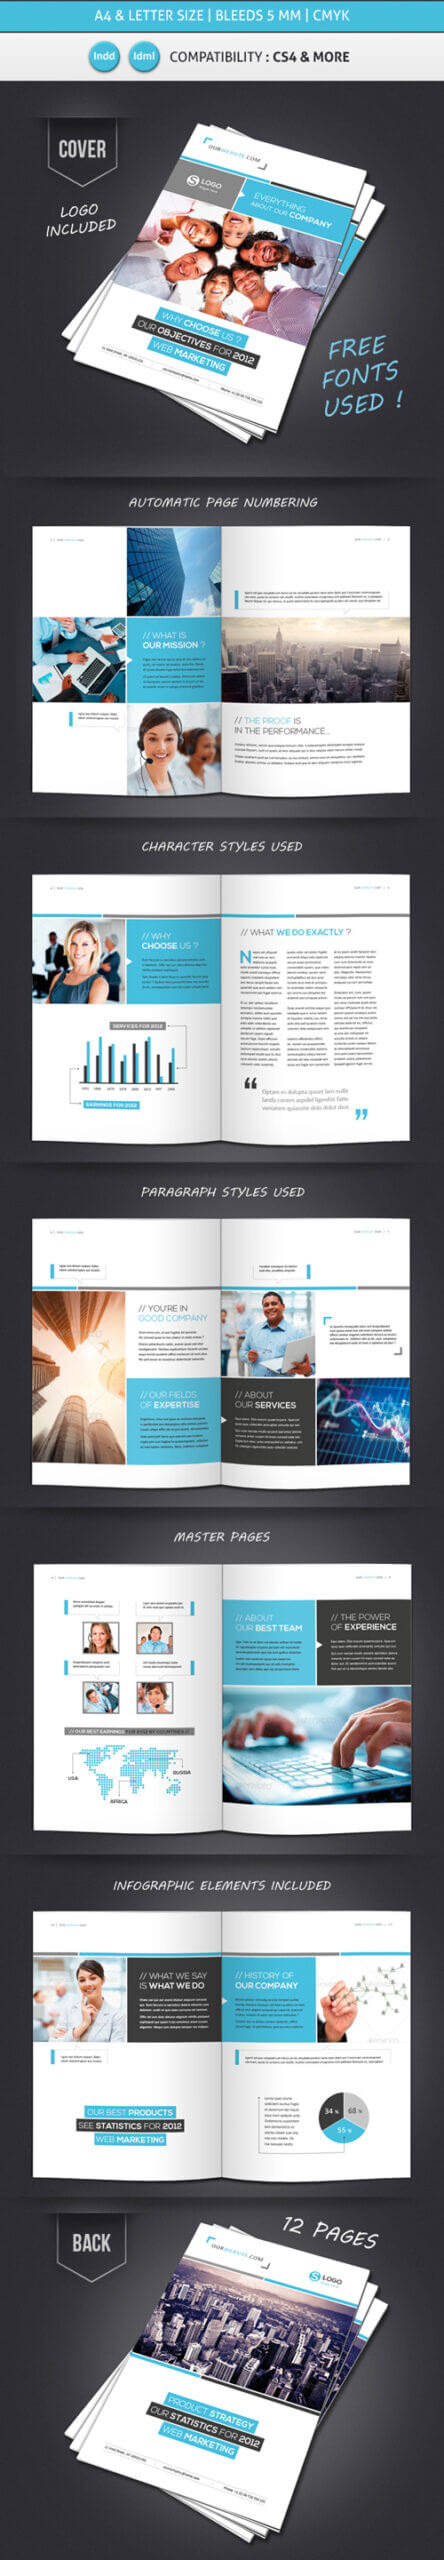 Professional Brochure Designs | Design | Graphic Design Junction Throughout 12 Page Brochure Template